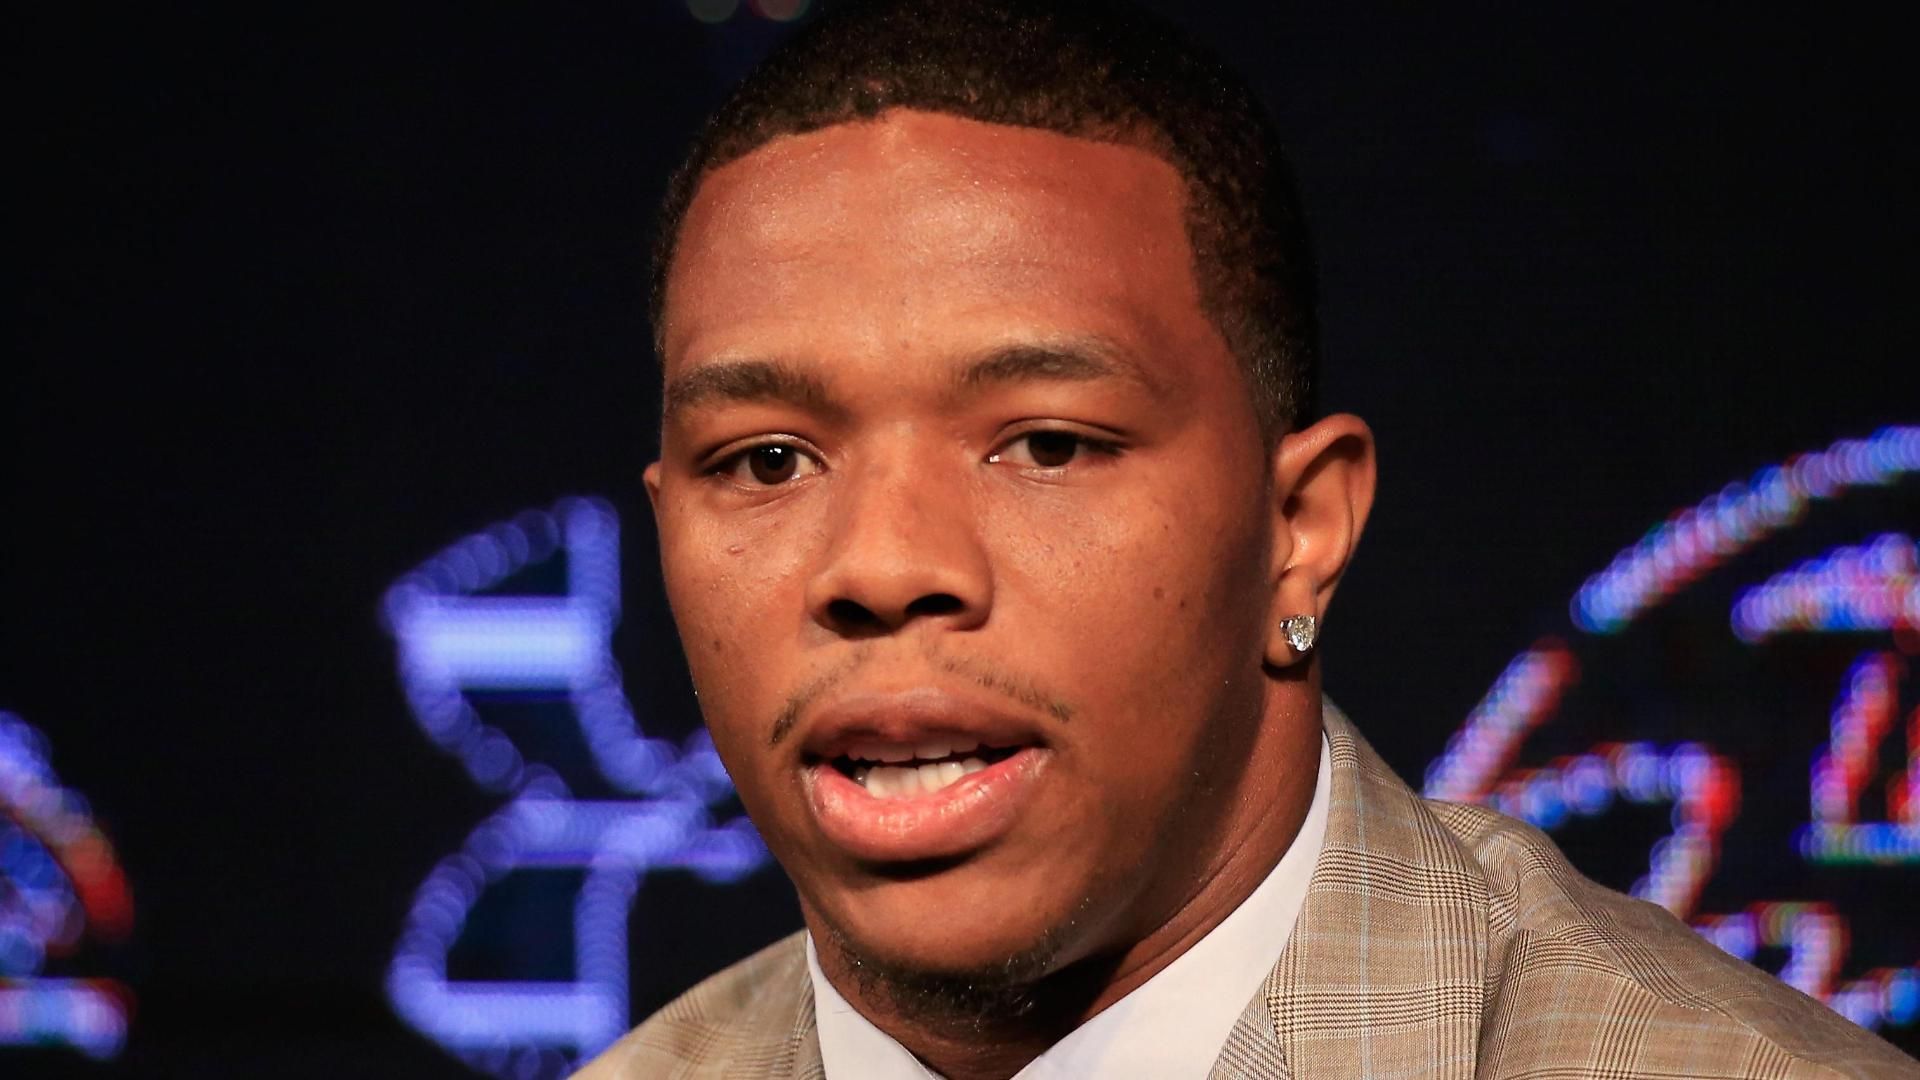 Will A Team Sign Ray Rice?